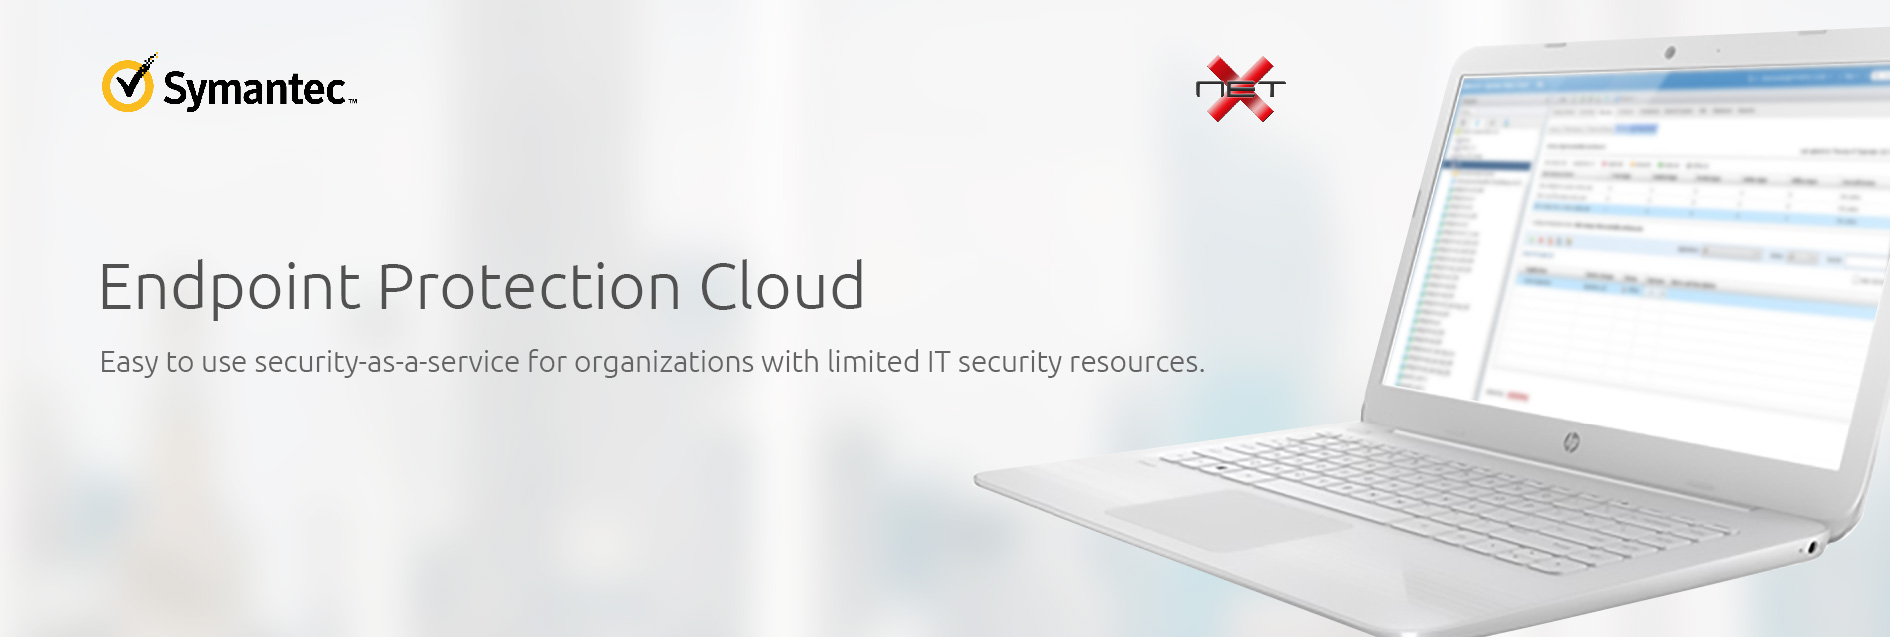 symantec endpoint protection cloud removal tool